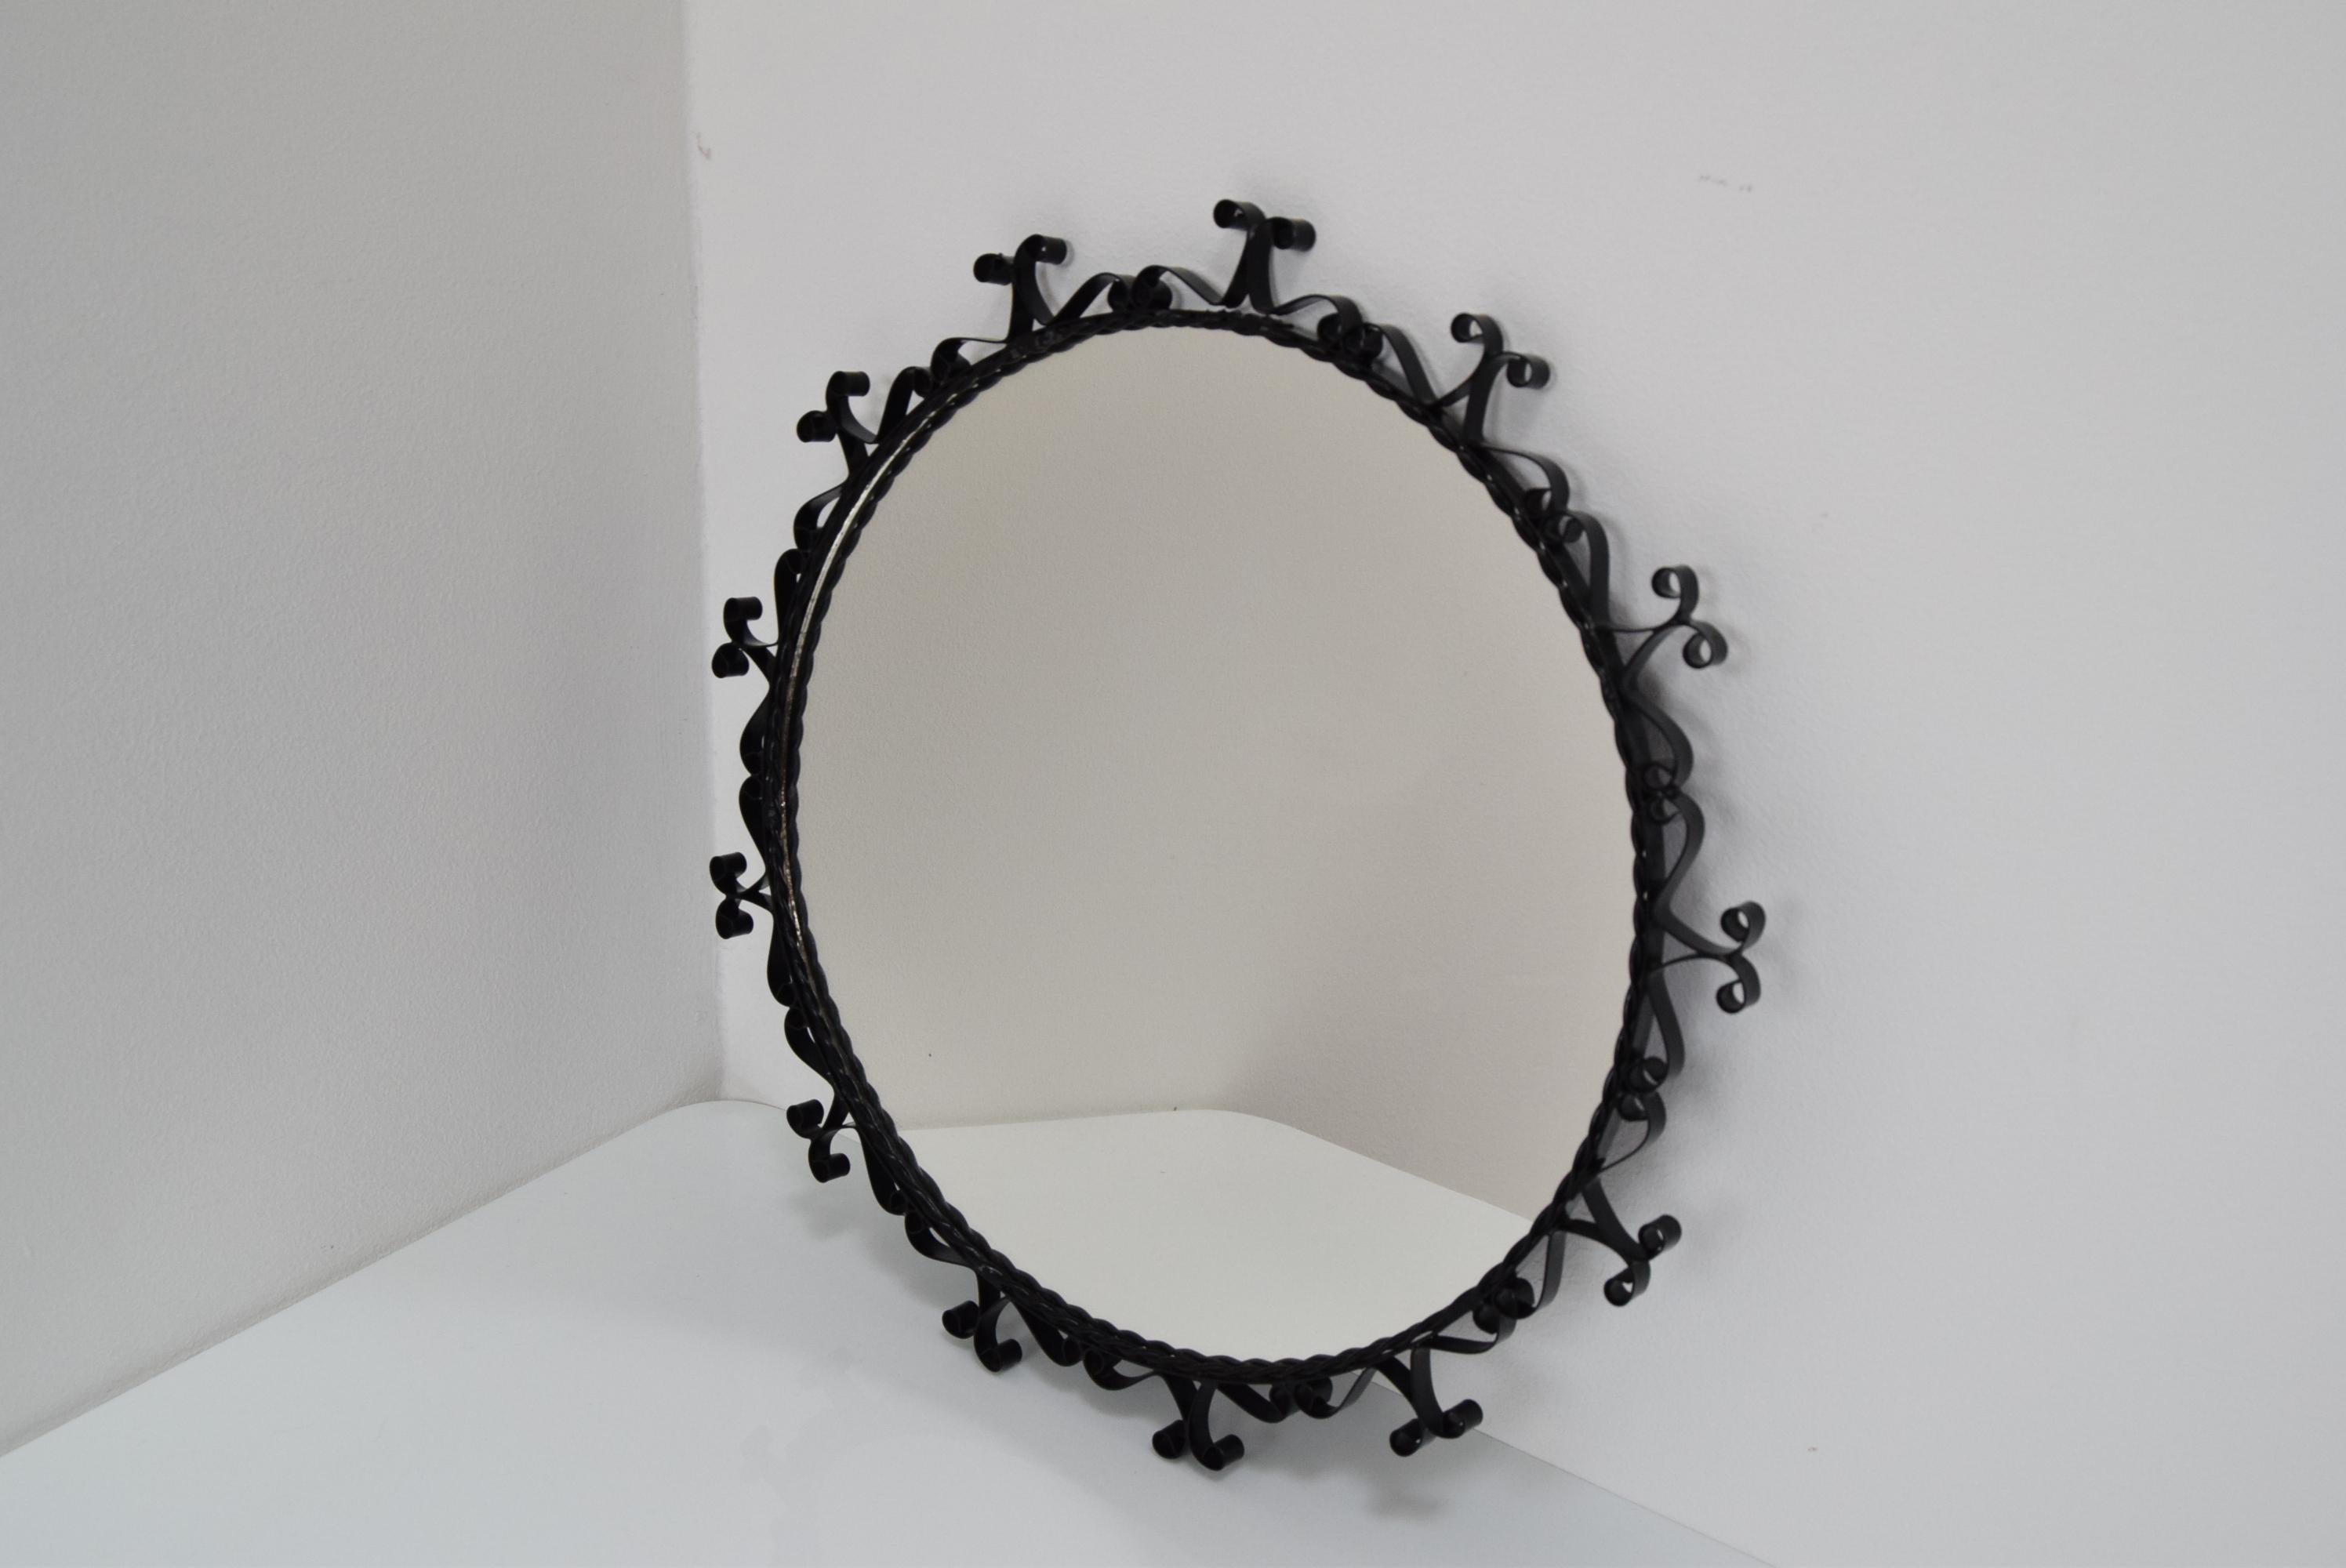 Made in Czechoslovakia
Made of mirror, metal
With aged patina
Re-polished
Good original condition.